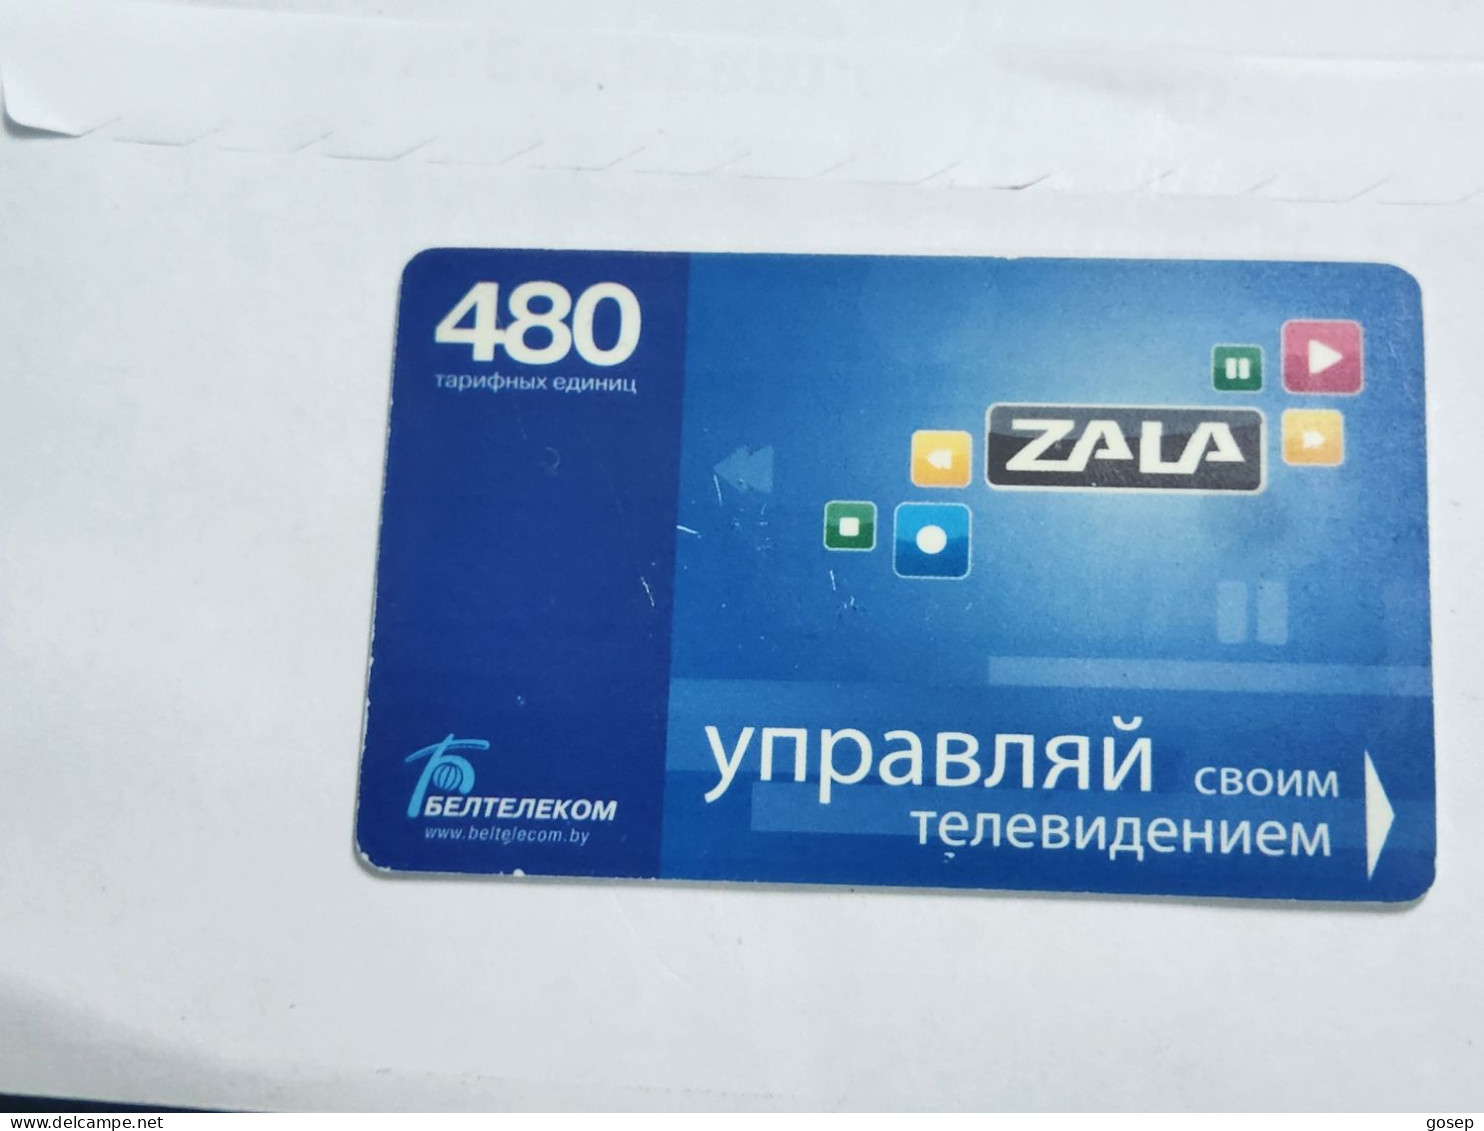 BELARUS-(BY-BLT-216a)-Zala-Control Your-TV-(160)(GOLD CHIP)(014715)(tirage-?)-used Card+1card Prepiad Free - Belarus